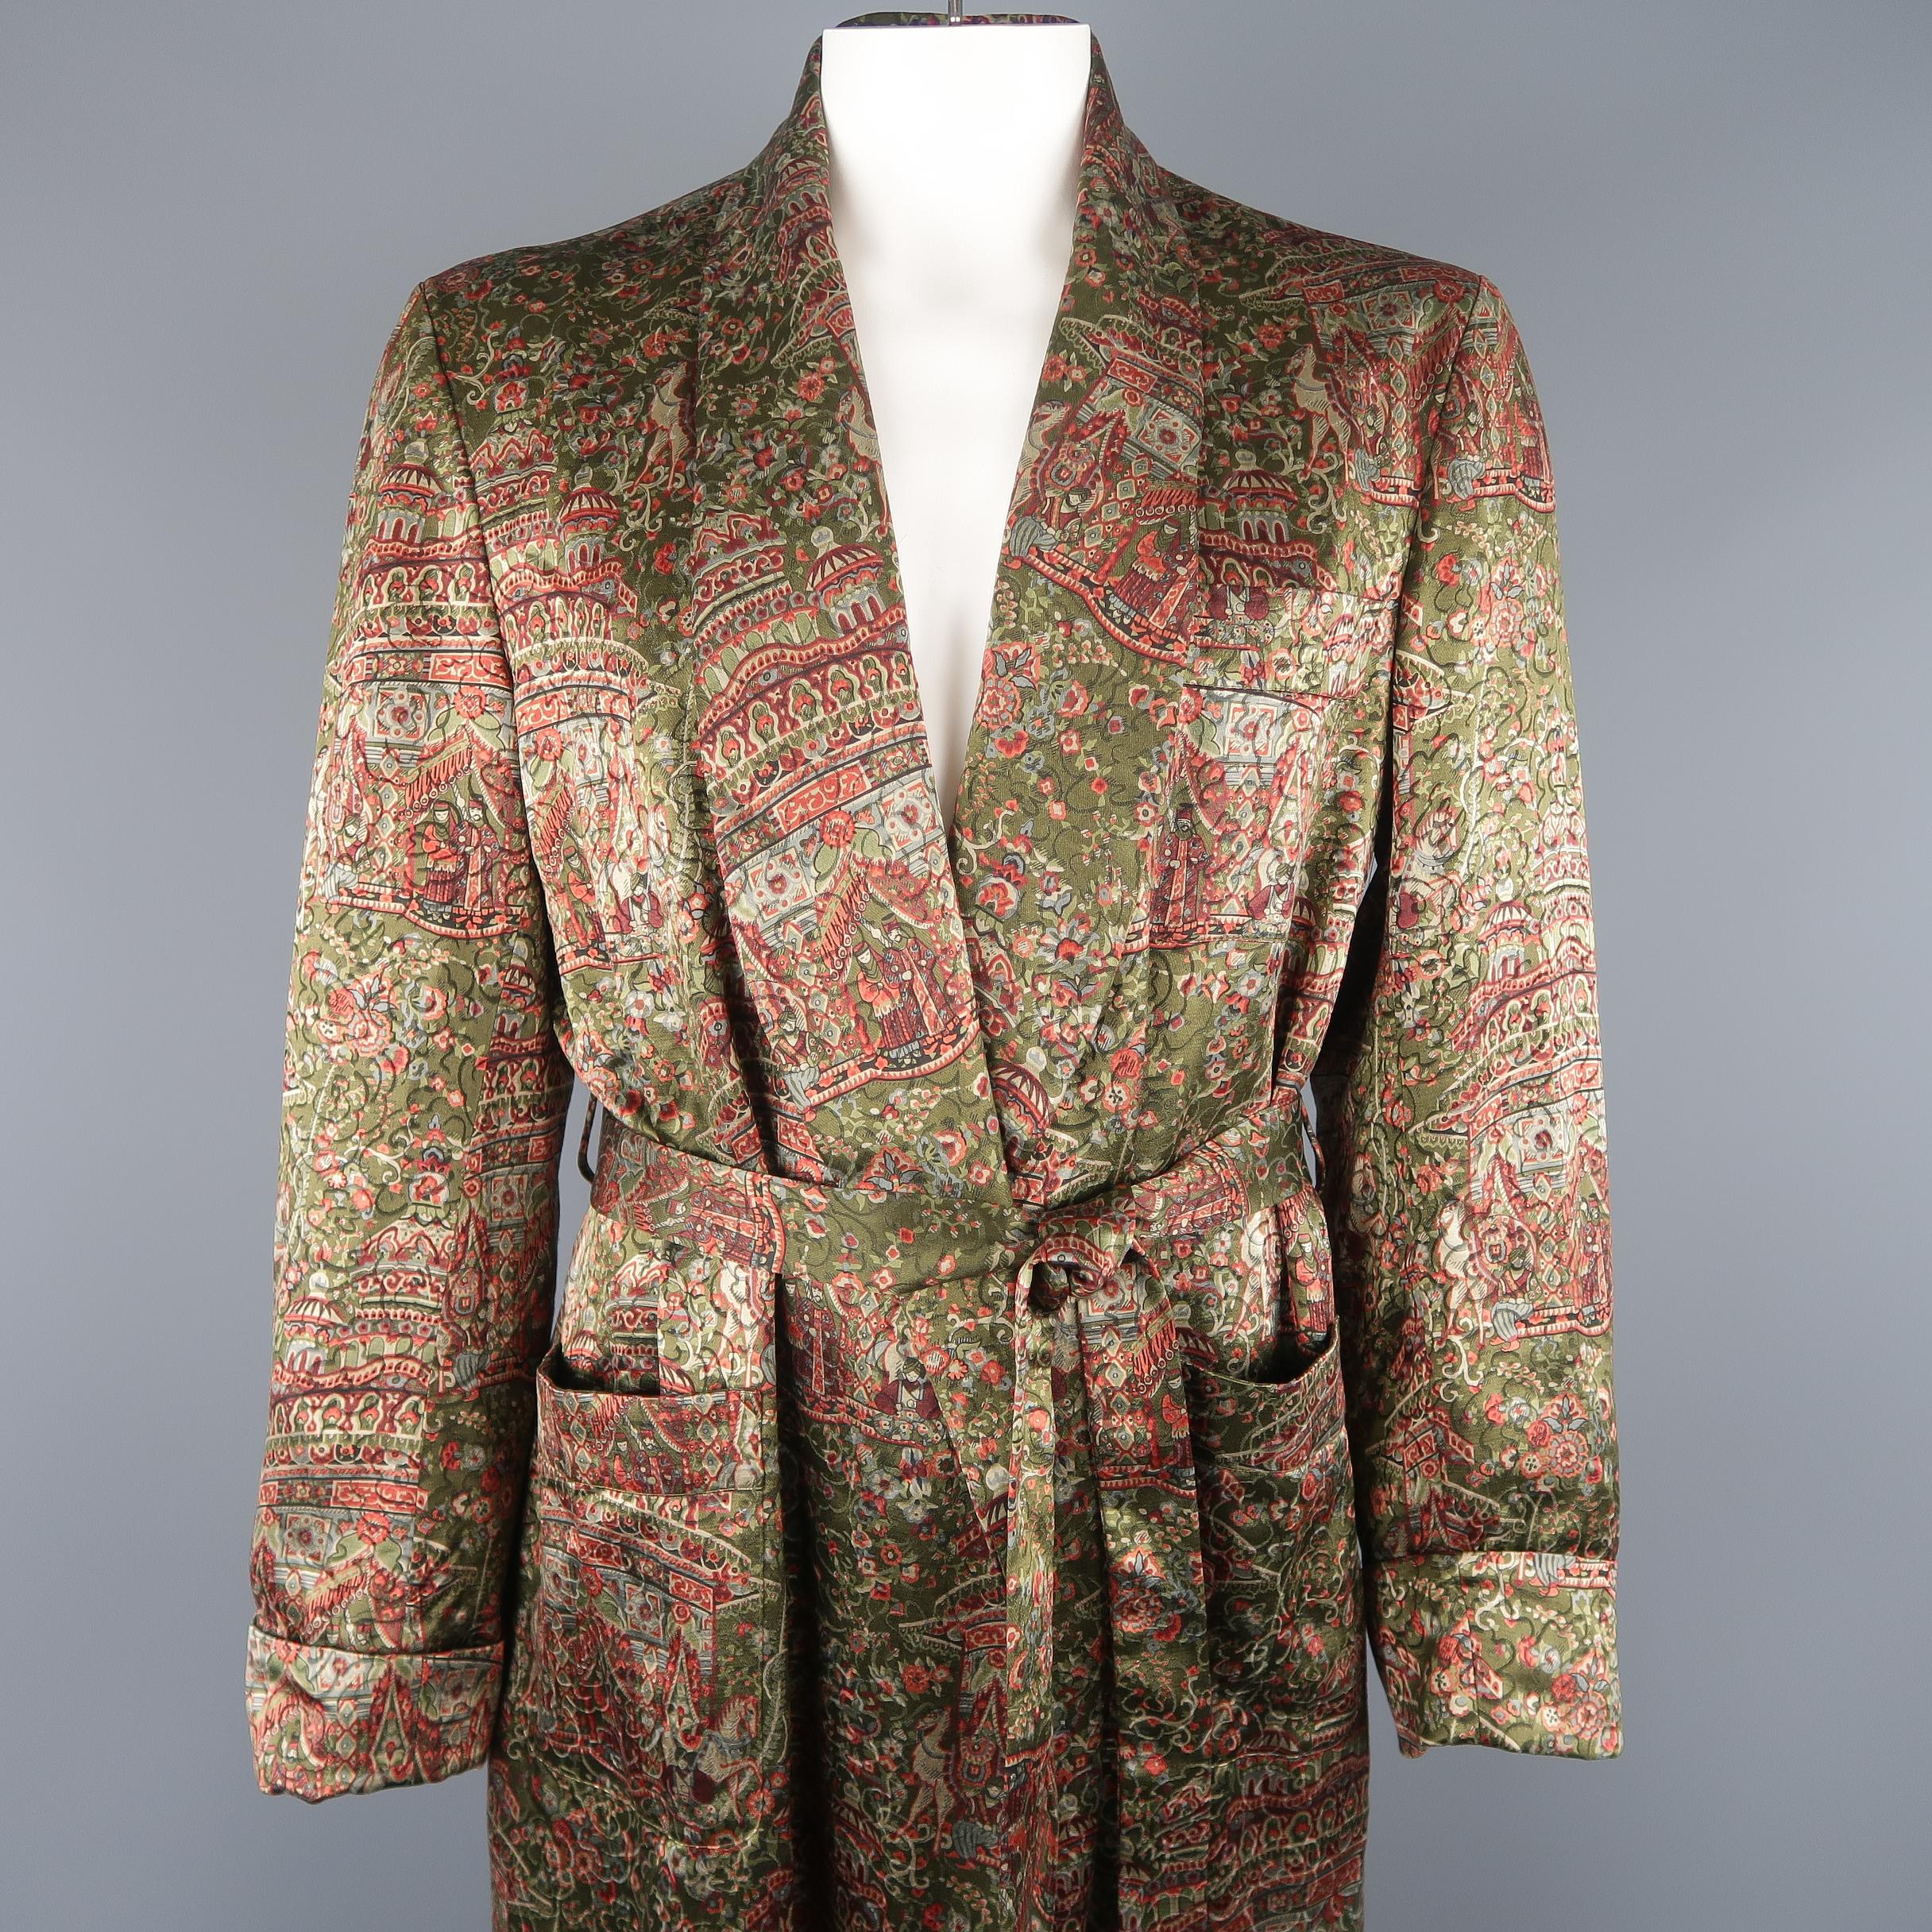 Vintage Hermes robe come in olive green textured satin with an all over Persian influenced print, shawl collar lapel, patch pockets, and belt tied waist. Minor wear. Made in France.
 
Good Pre-Owned Condition.
Marked: EU 54
 
Measurements:
